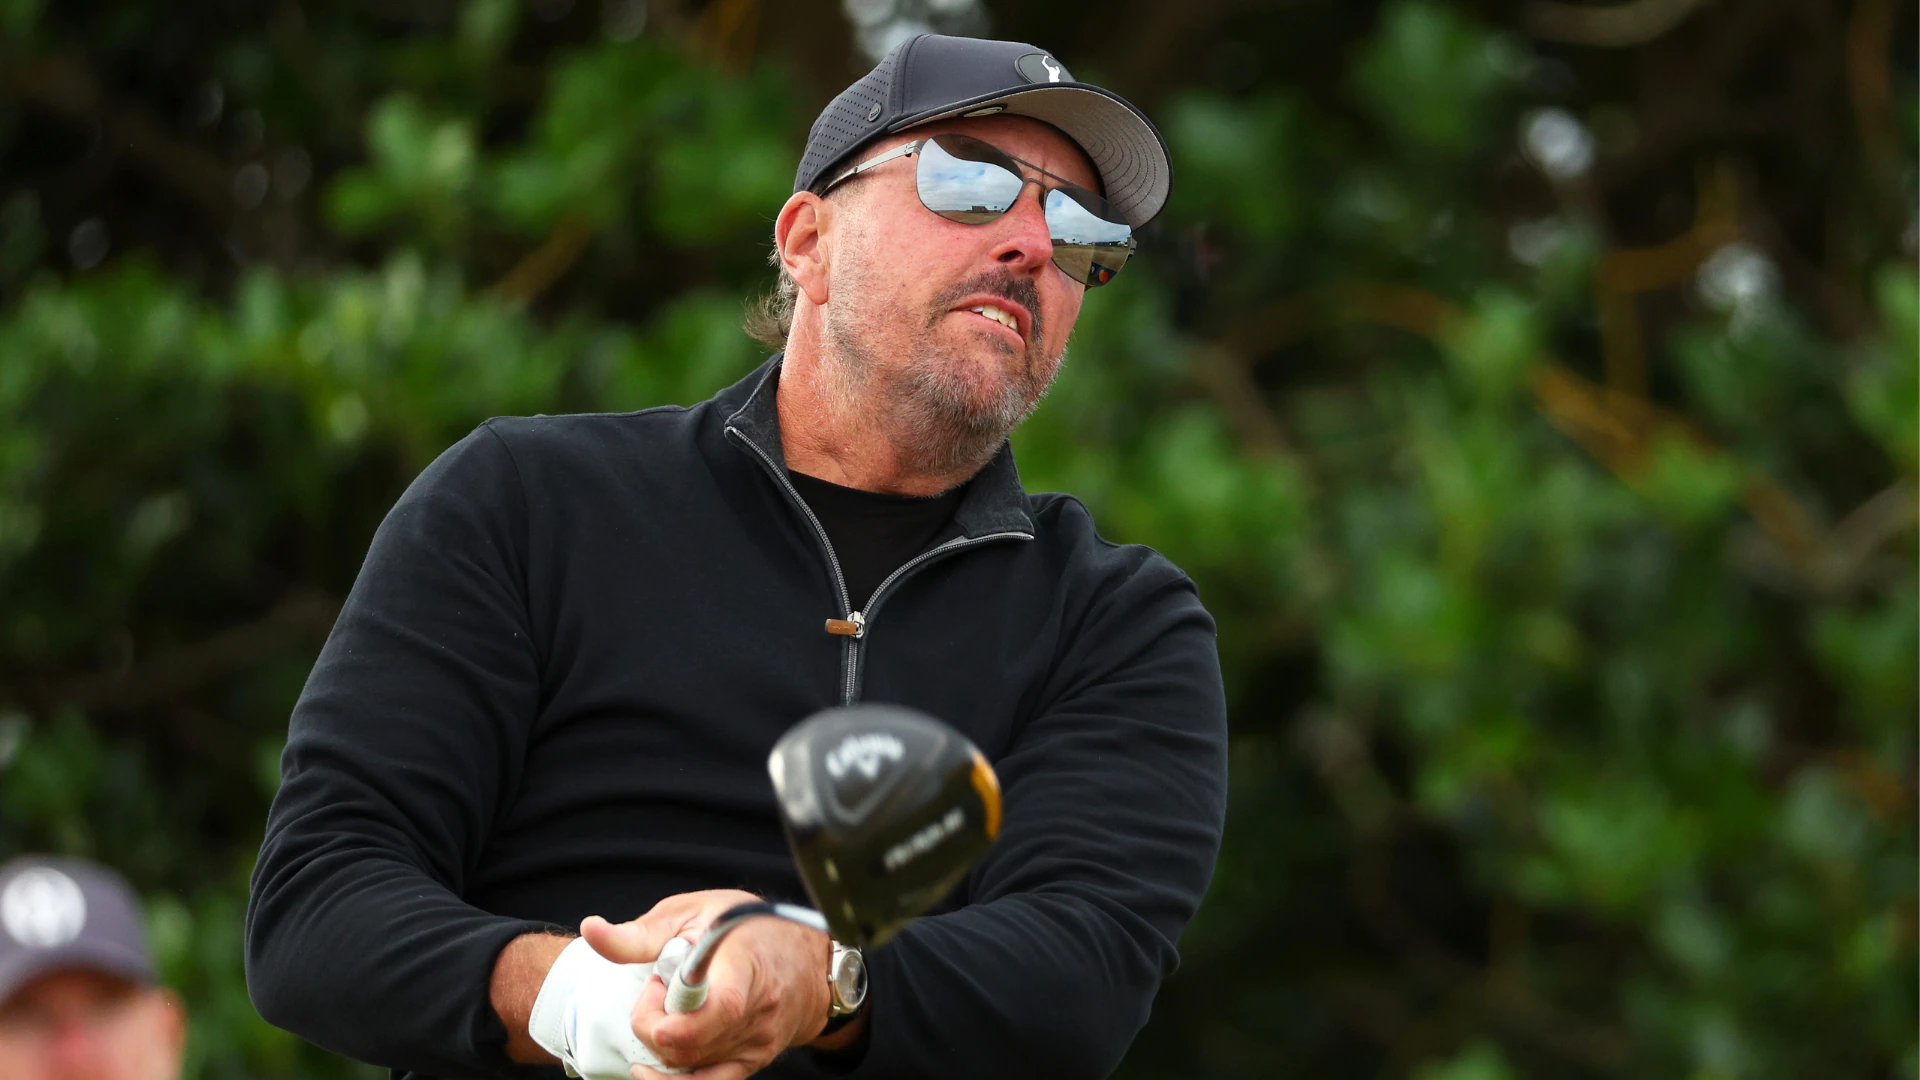 2022 British Open: Amid more LIV questions, Phil Mickelson snaps back: ‘Let it go, dude … I couldn’t be happier’